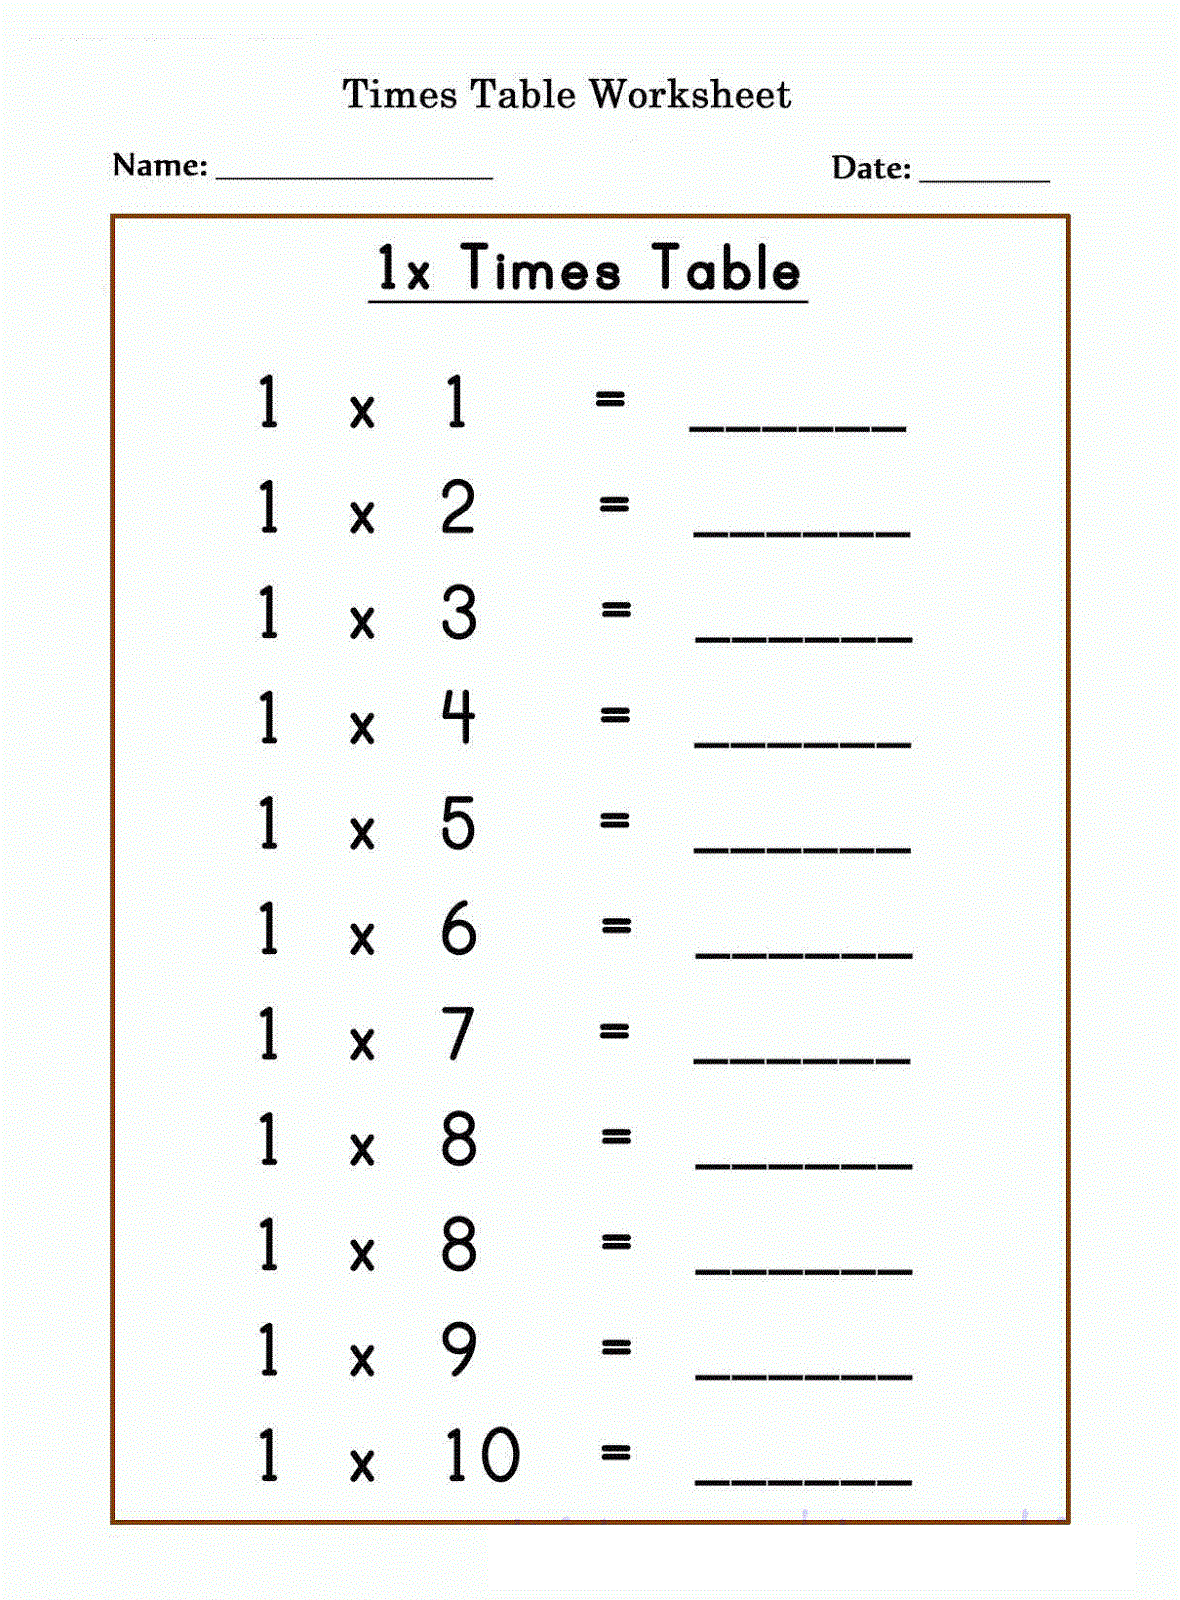 times table worksheets for kids